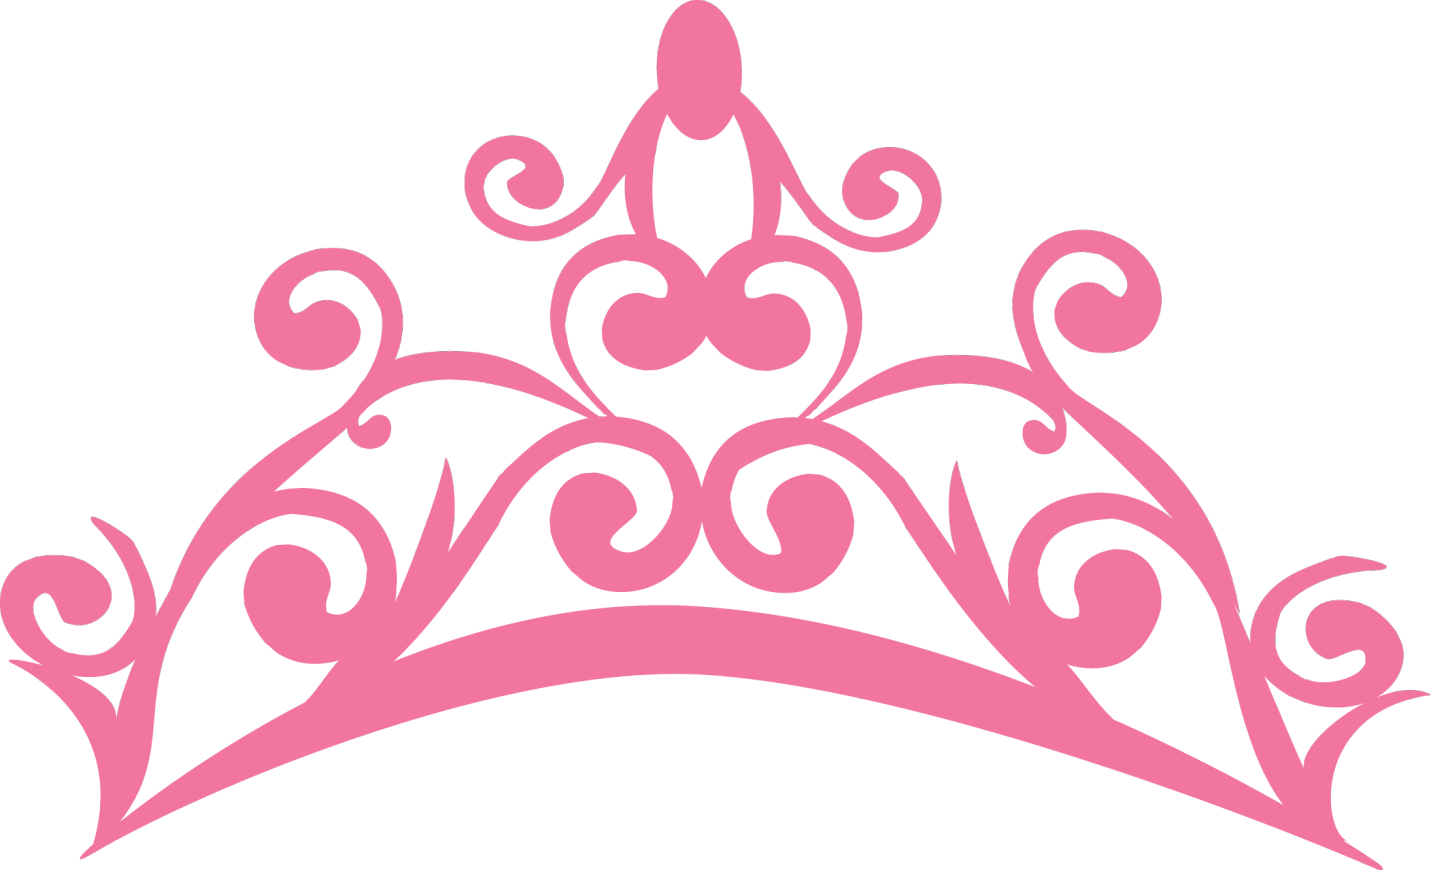 Clip art tiaras and crowns clipart kid